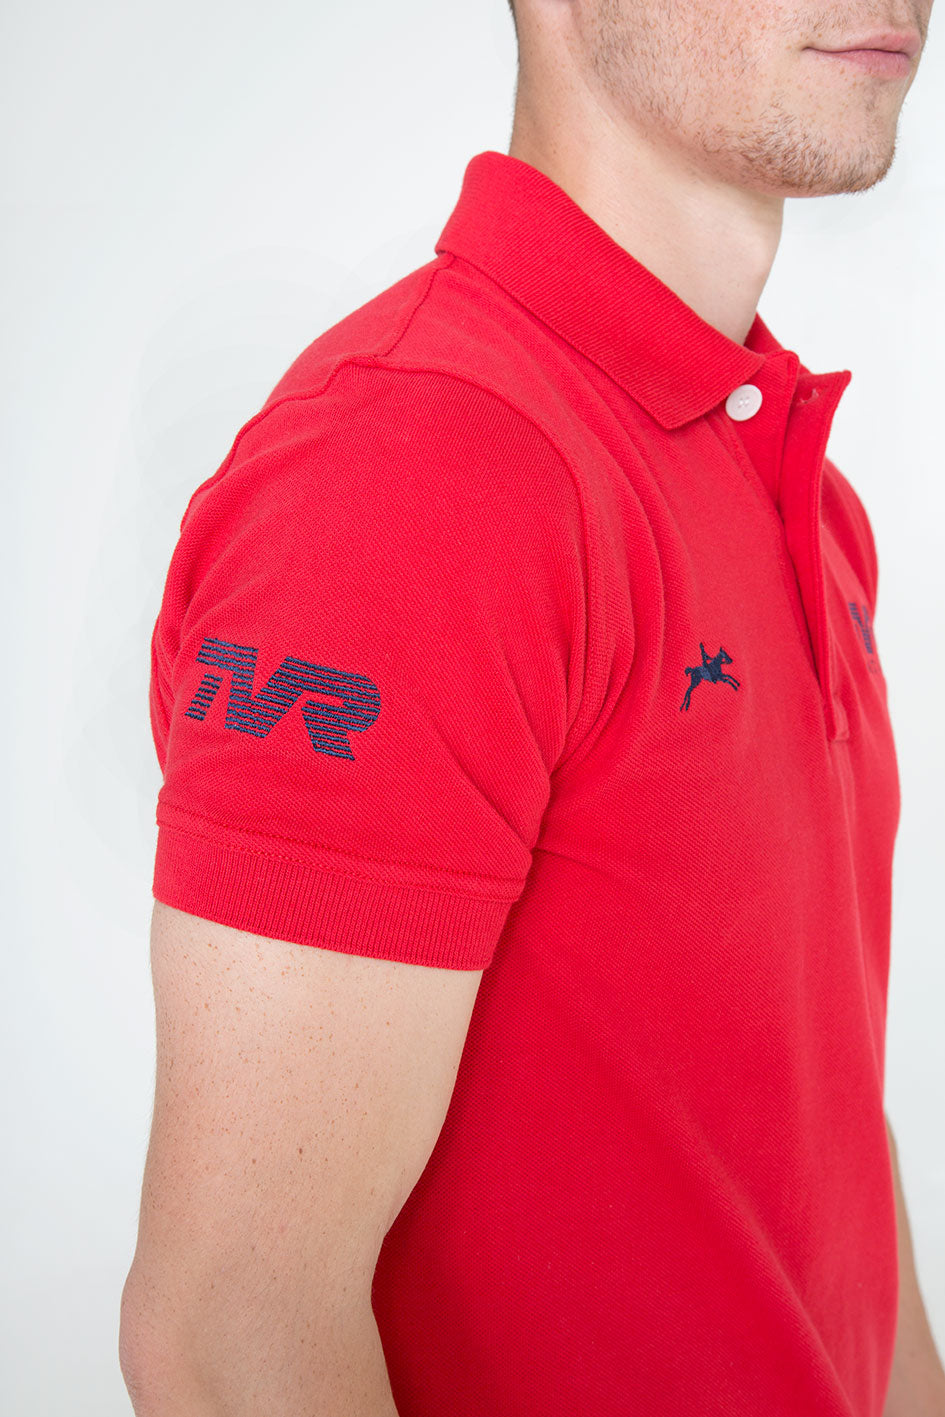 Griffith - Men's TVR Racing Polo Shirt